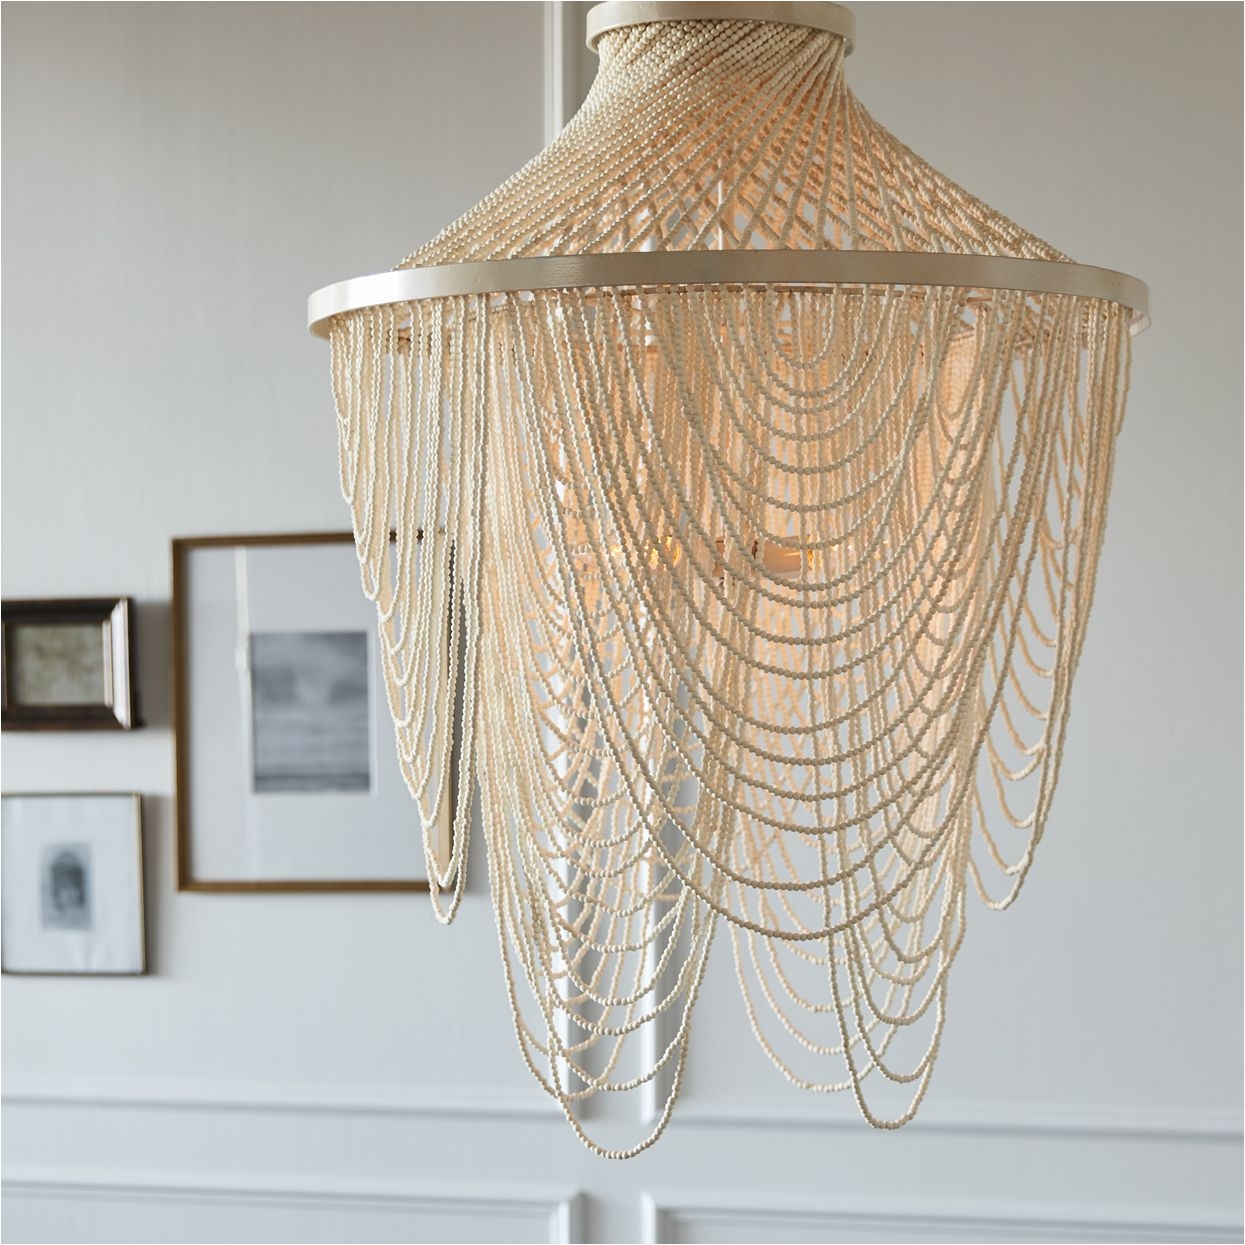 palecek mariana beaded chandelier chandelier is fully beaded with tiny wood beads in a soft white finish complete with a cream finished chain and canopy for